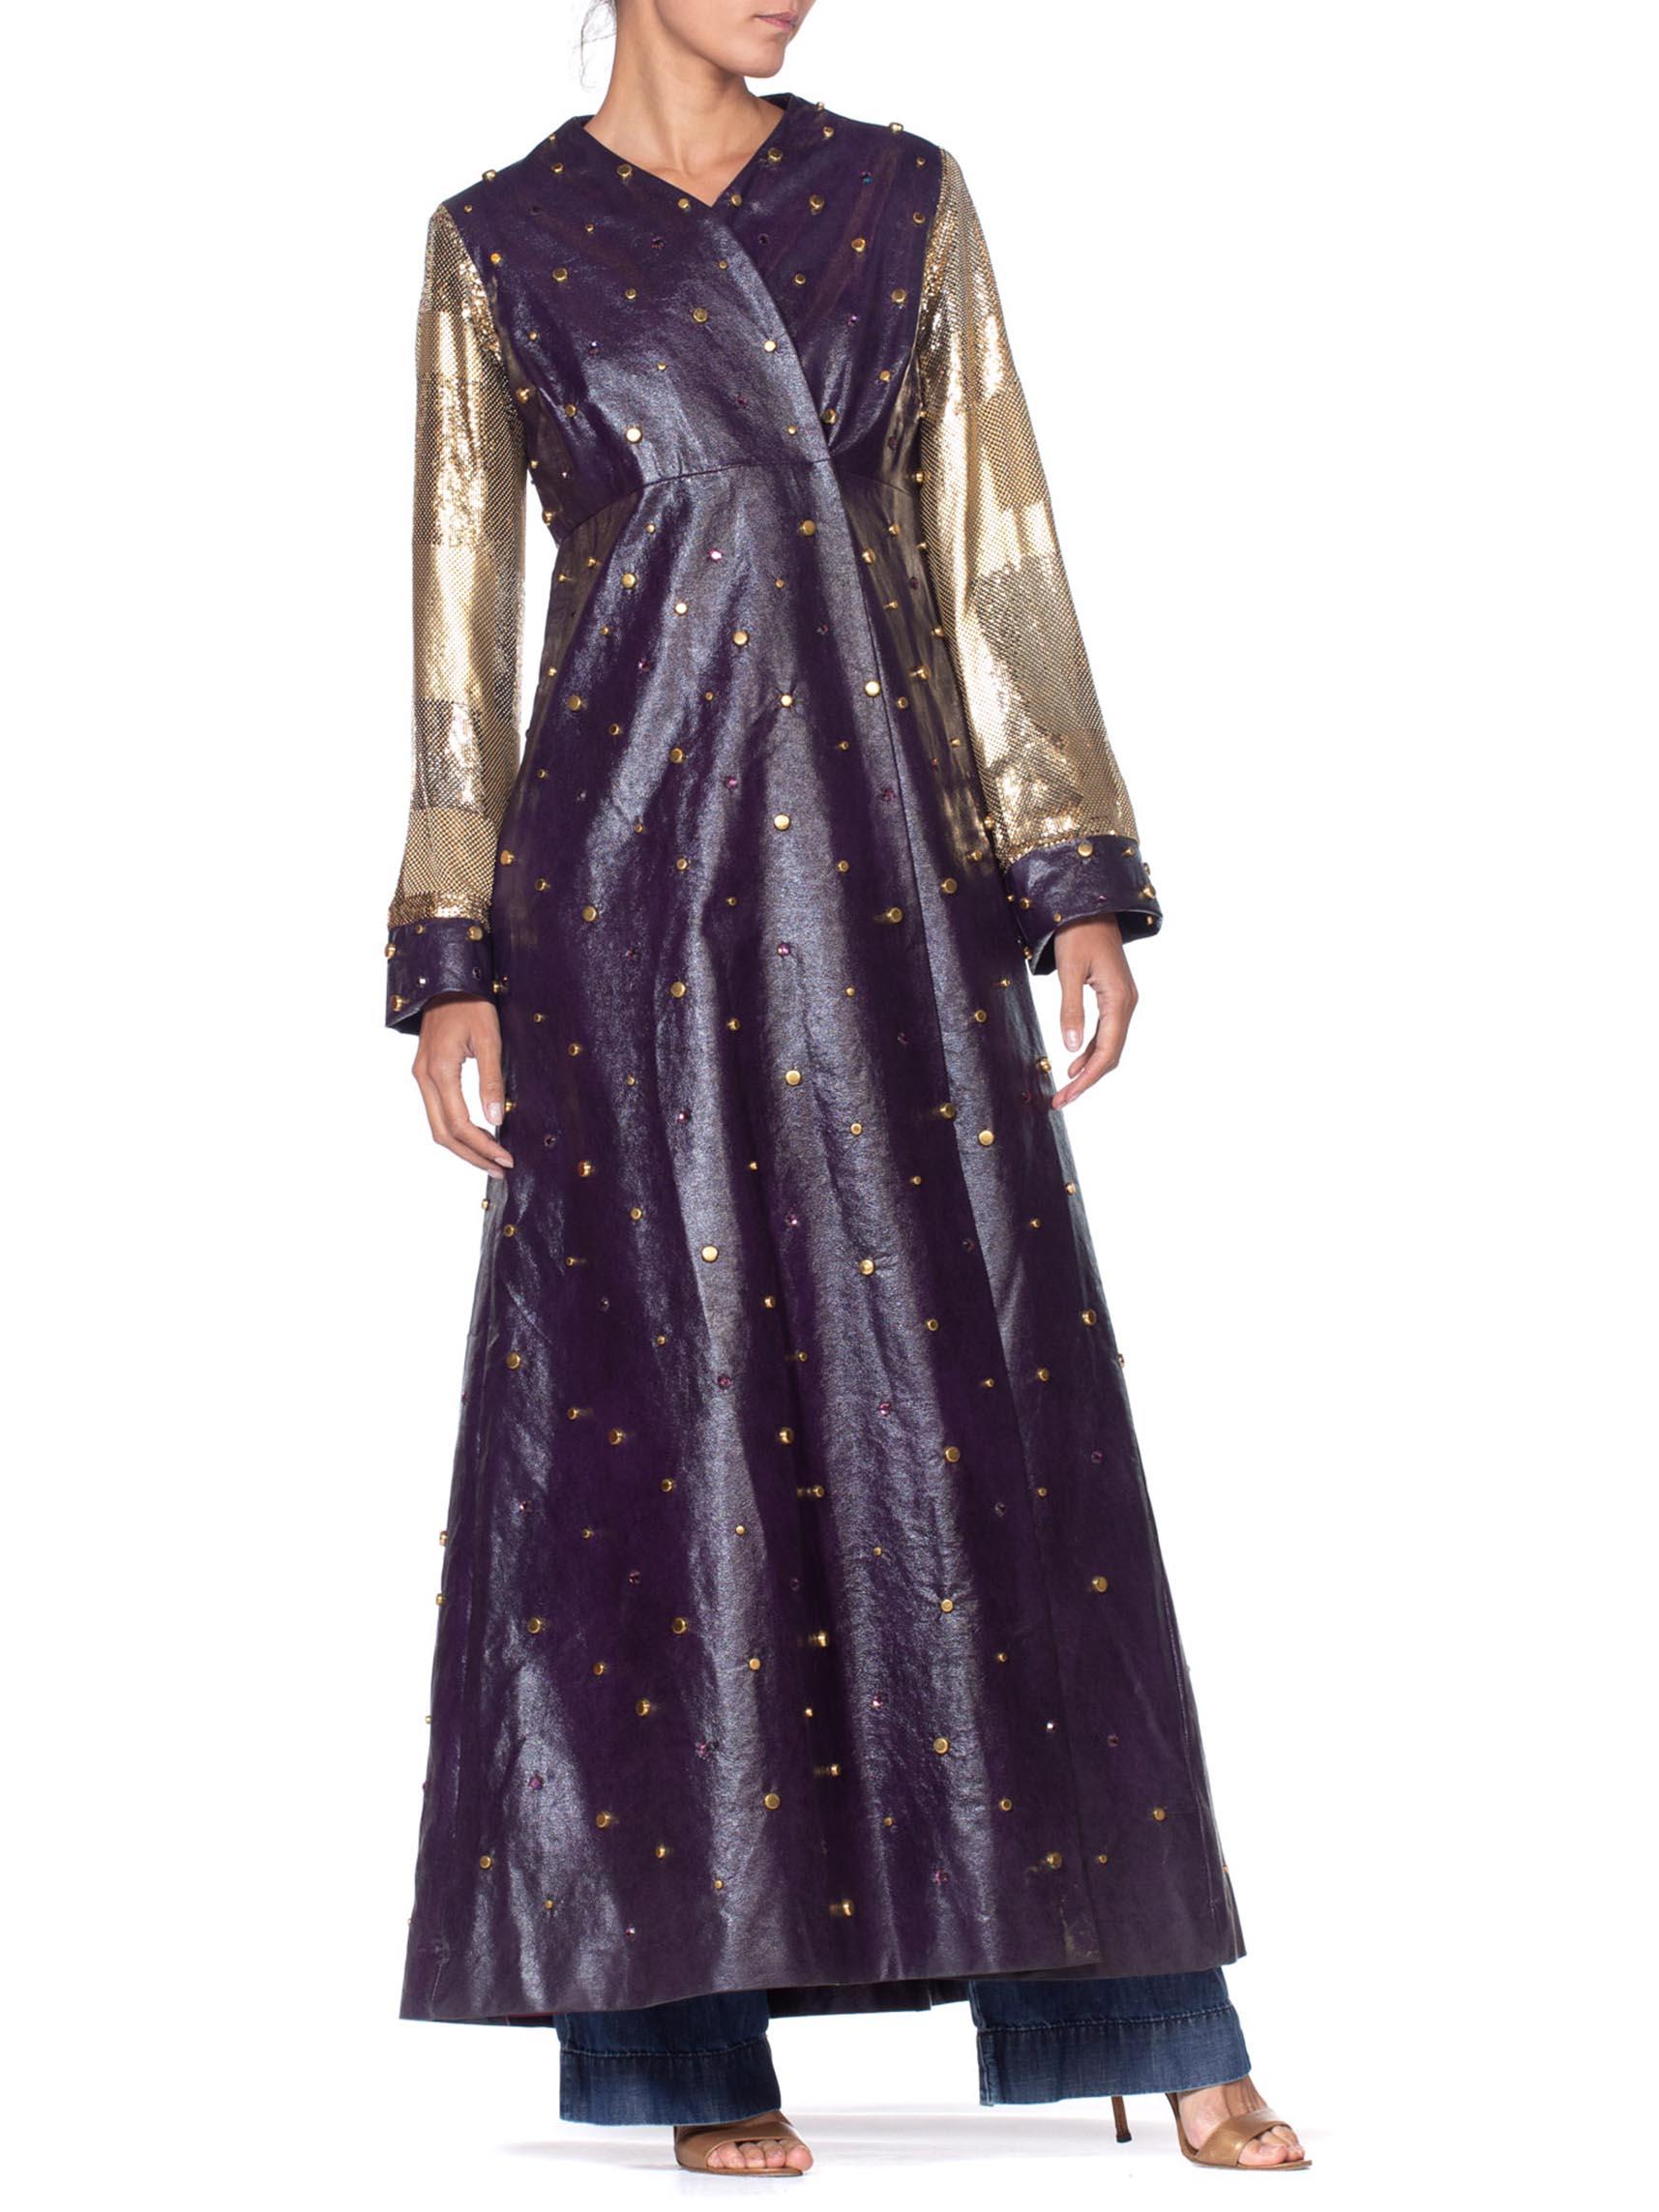 MORPHEW COLLECTION Eggplant Purple Crystal Studded Pleather Maxi Coat With Gold Metal Mesh Patchwork Sleeves
MORPHEW COLLECTION is made entirely by hand in our NYC Ateliér of rare antique materials sourced from around the globe. Our sustainable